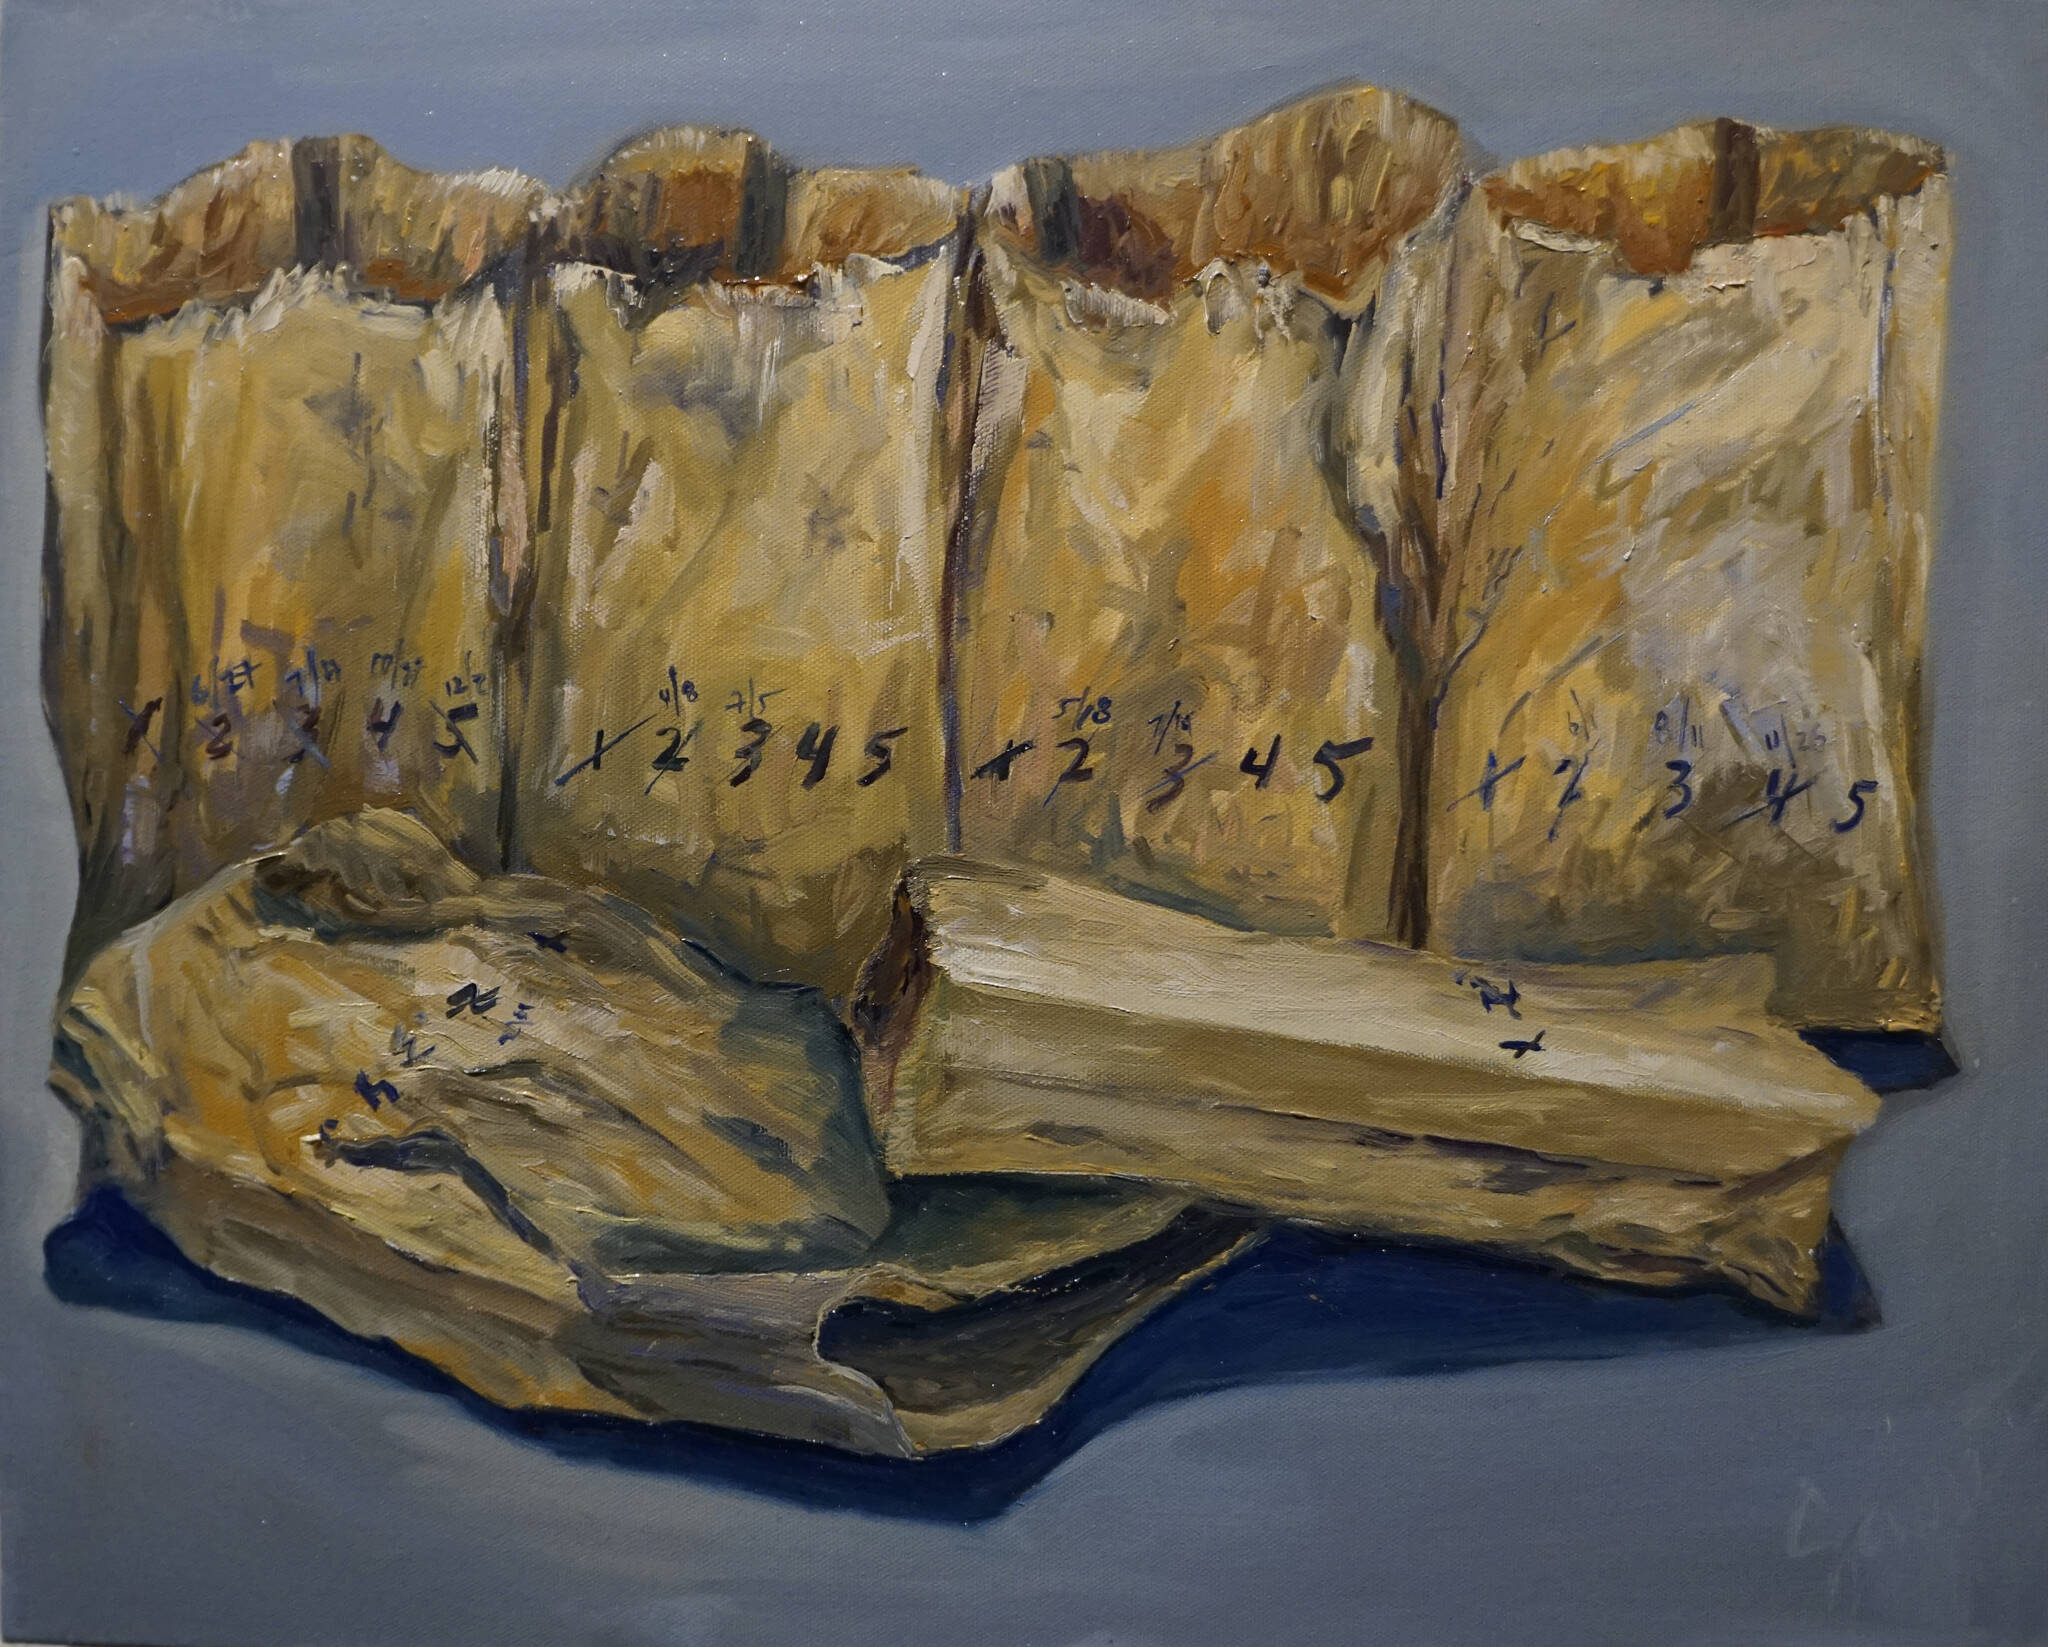 “Paper Bag System” is one of the paintings in Dr. Sami Ali’s exhibit, “The Mind of a Healthcare Worker During the COVID-19 Pandemic,” showing in January 2022 at the Homer Council on the Arts in Homer, Alaska. The painting shows the system healthcare workers used to rotate used face masks during the early days when they had shortages. (Photo by Michael Armstrong/Homer News)